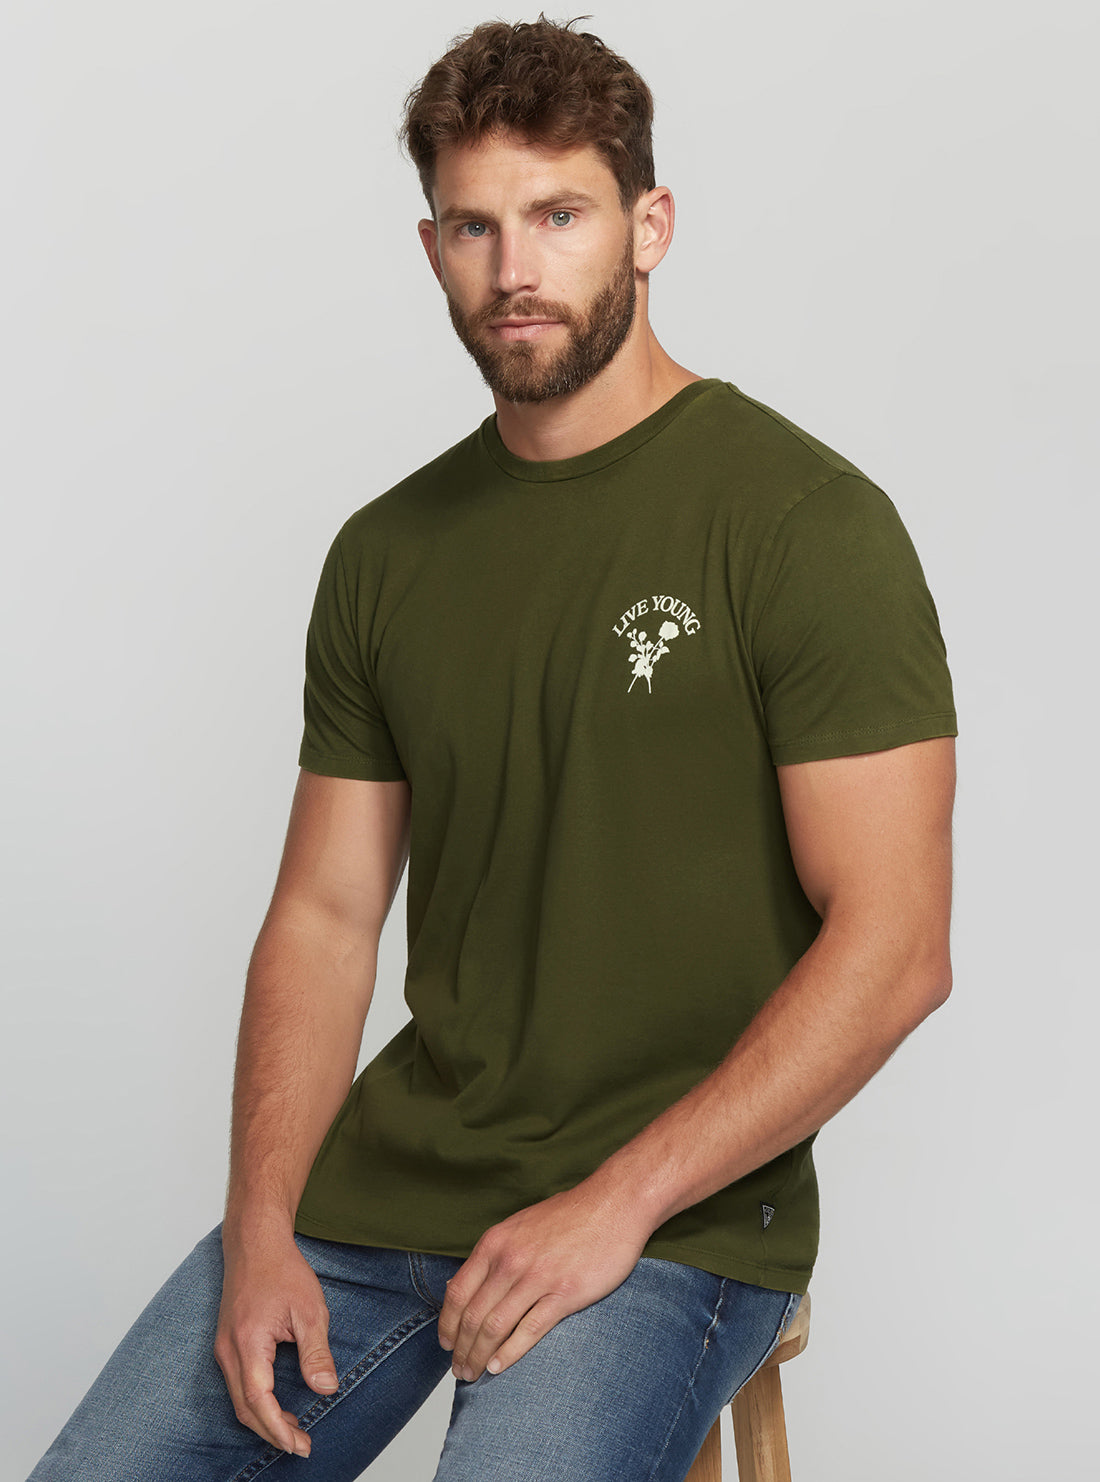 GUESS Men's Green Multi Live Young T-Shirt M2BI74KBDL0 Seated View